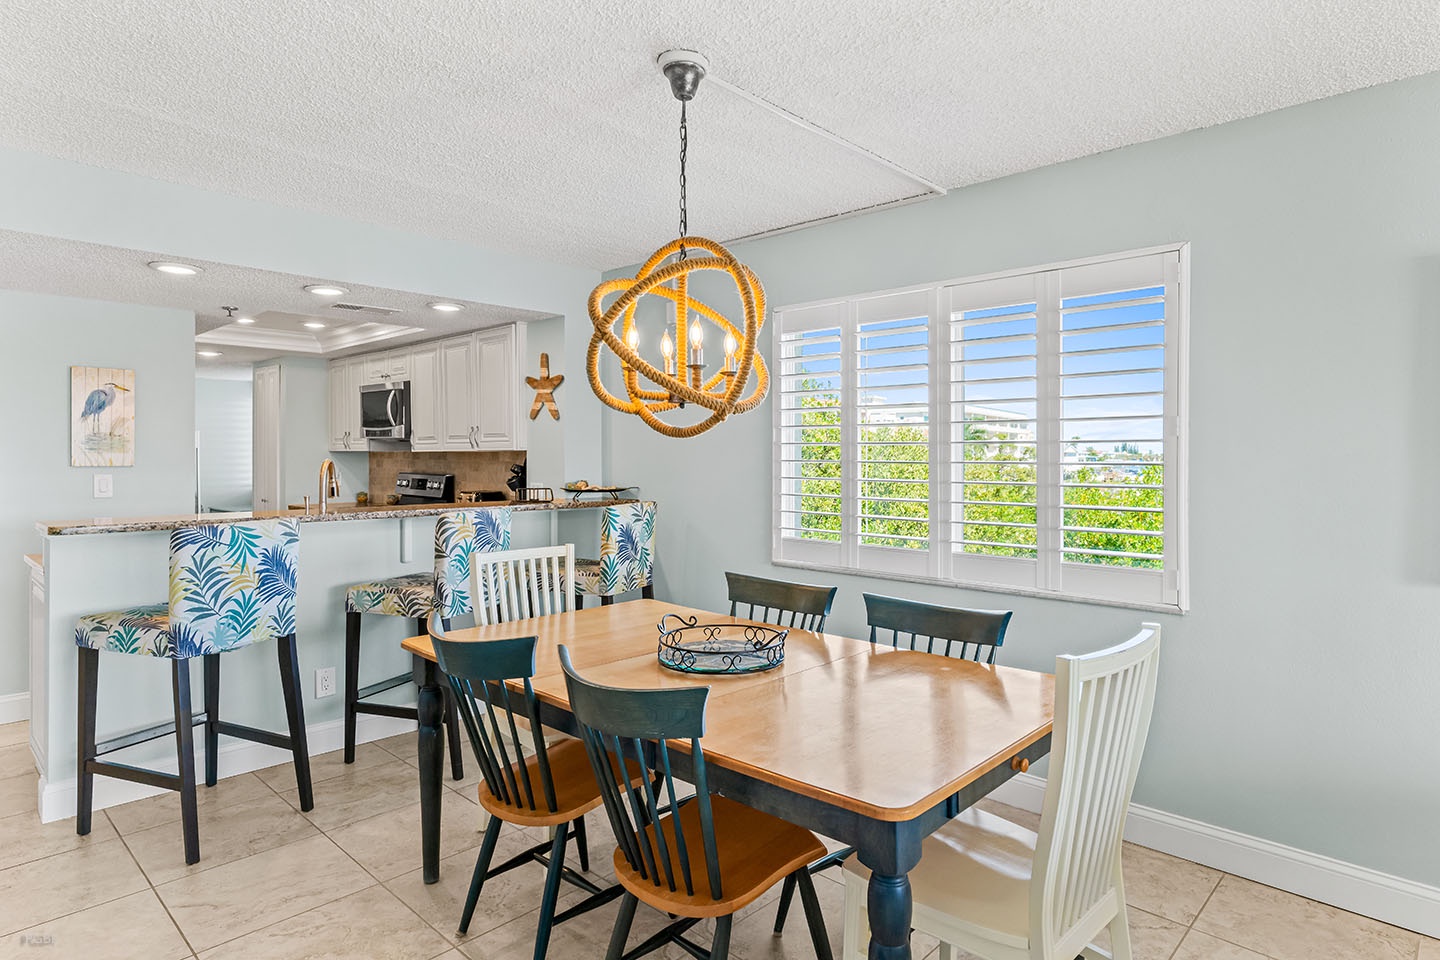 A nice, bright dining area for family dinners.